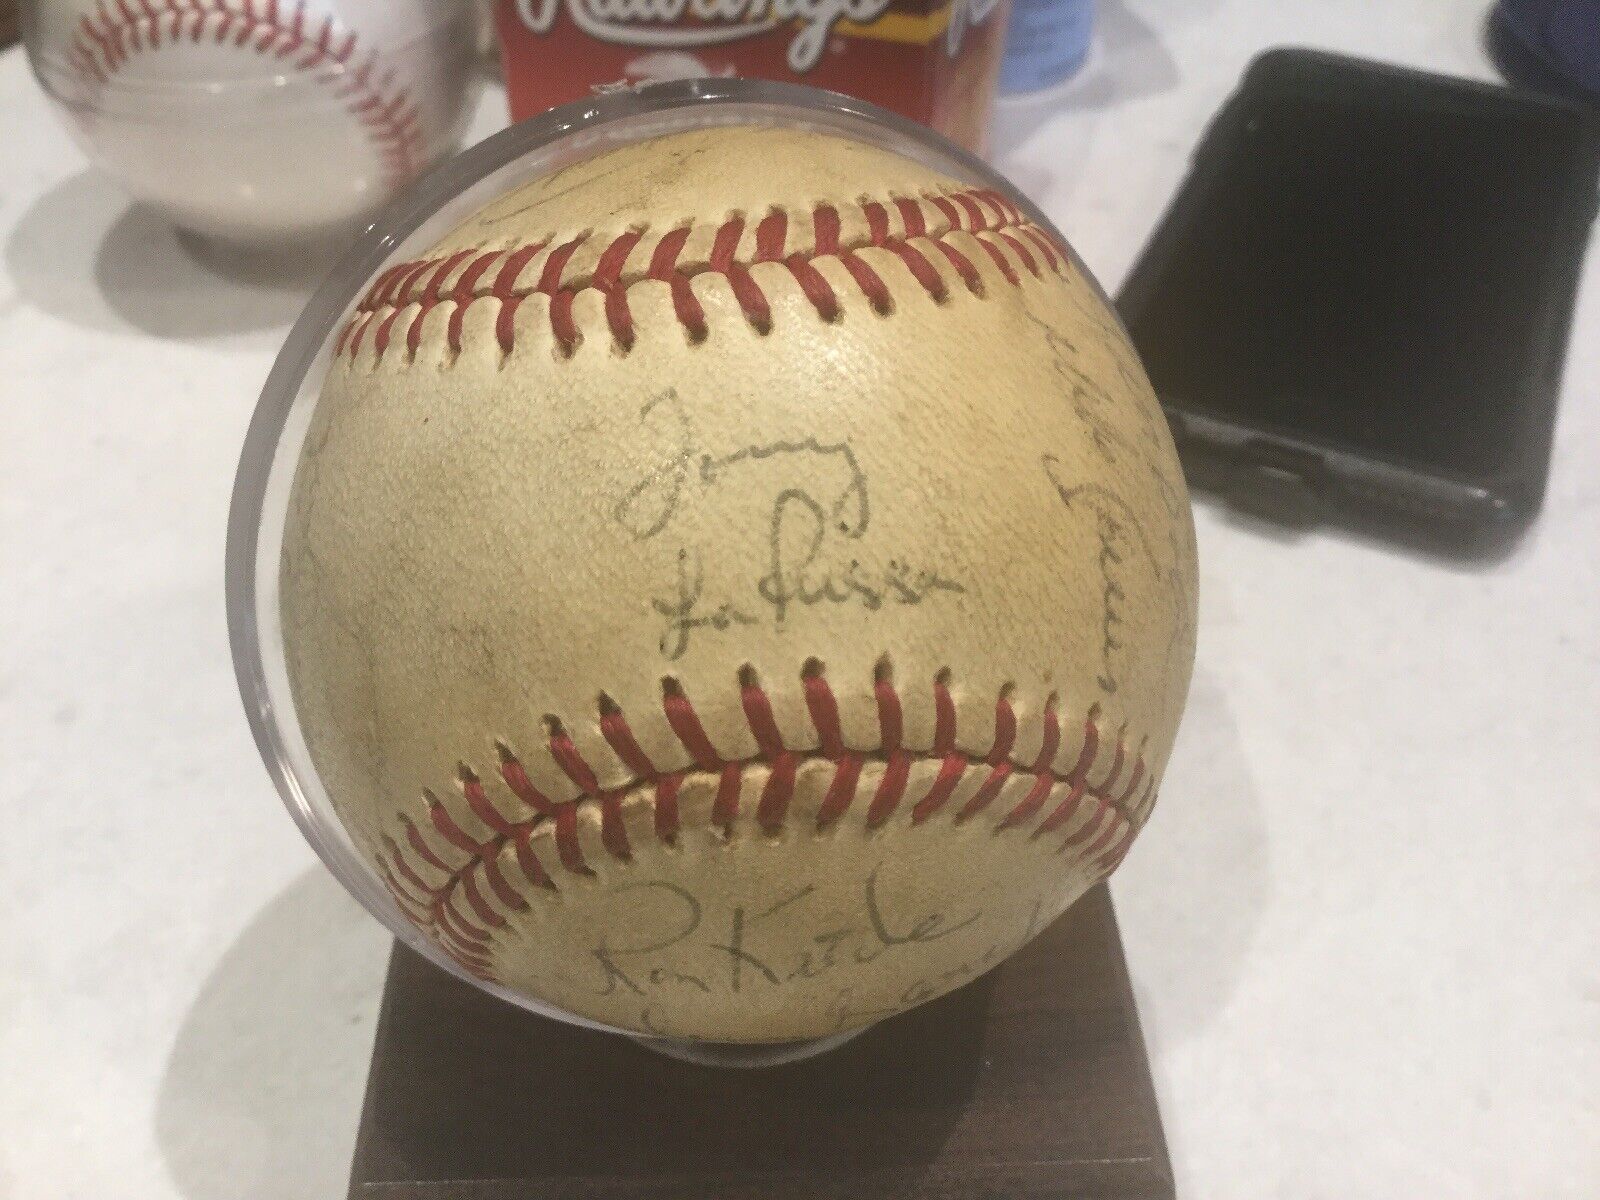 Chicago White Sox Team Autographed Baseball. 1980’s. Tony LaRussa Manager